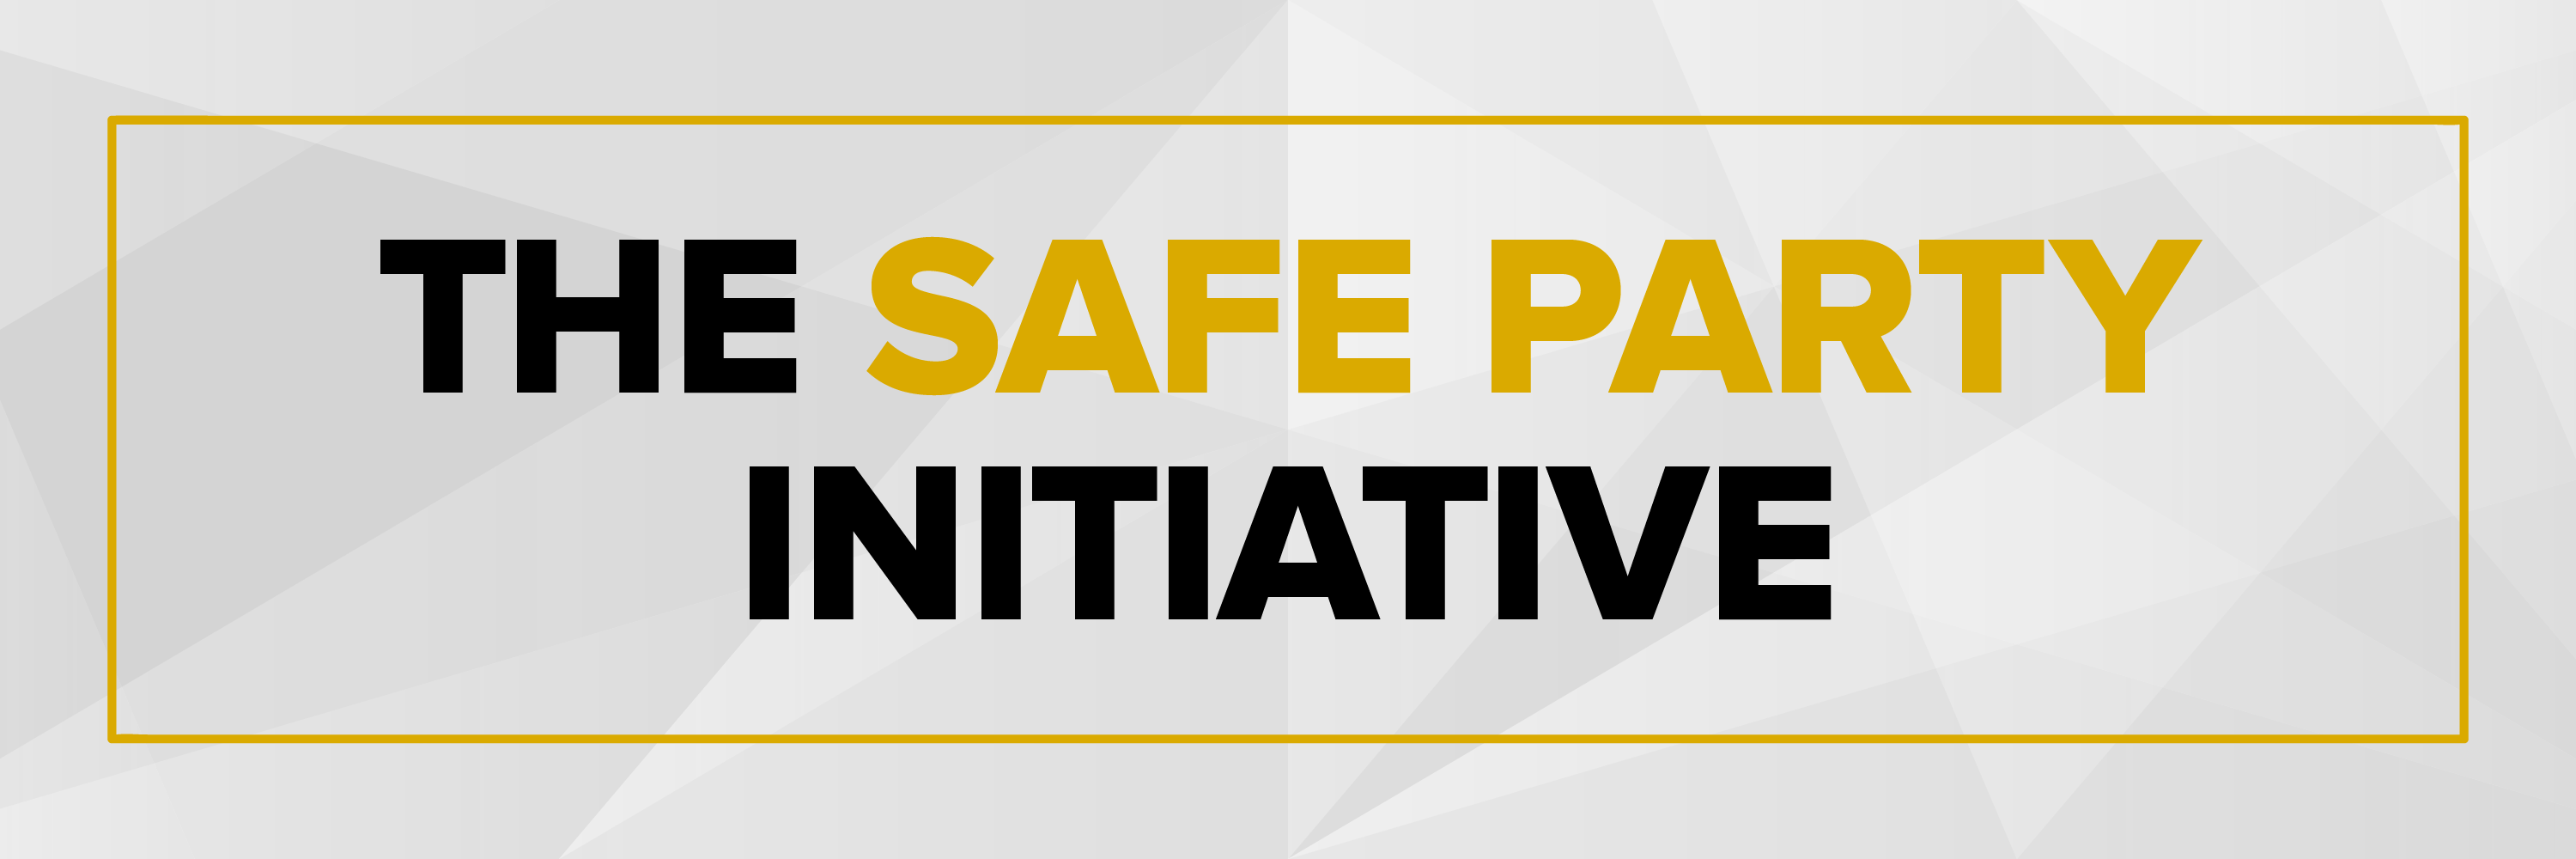 Safe Party Initiative Banner